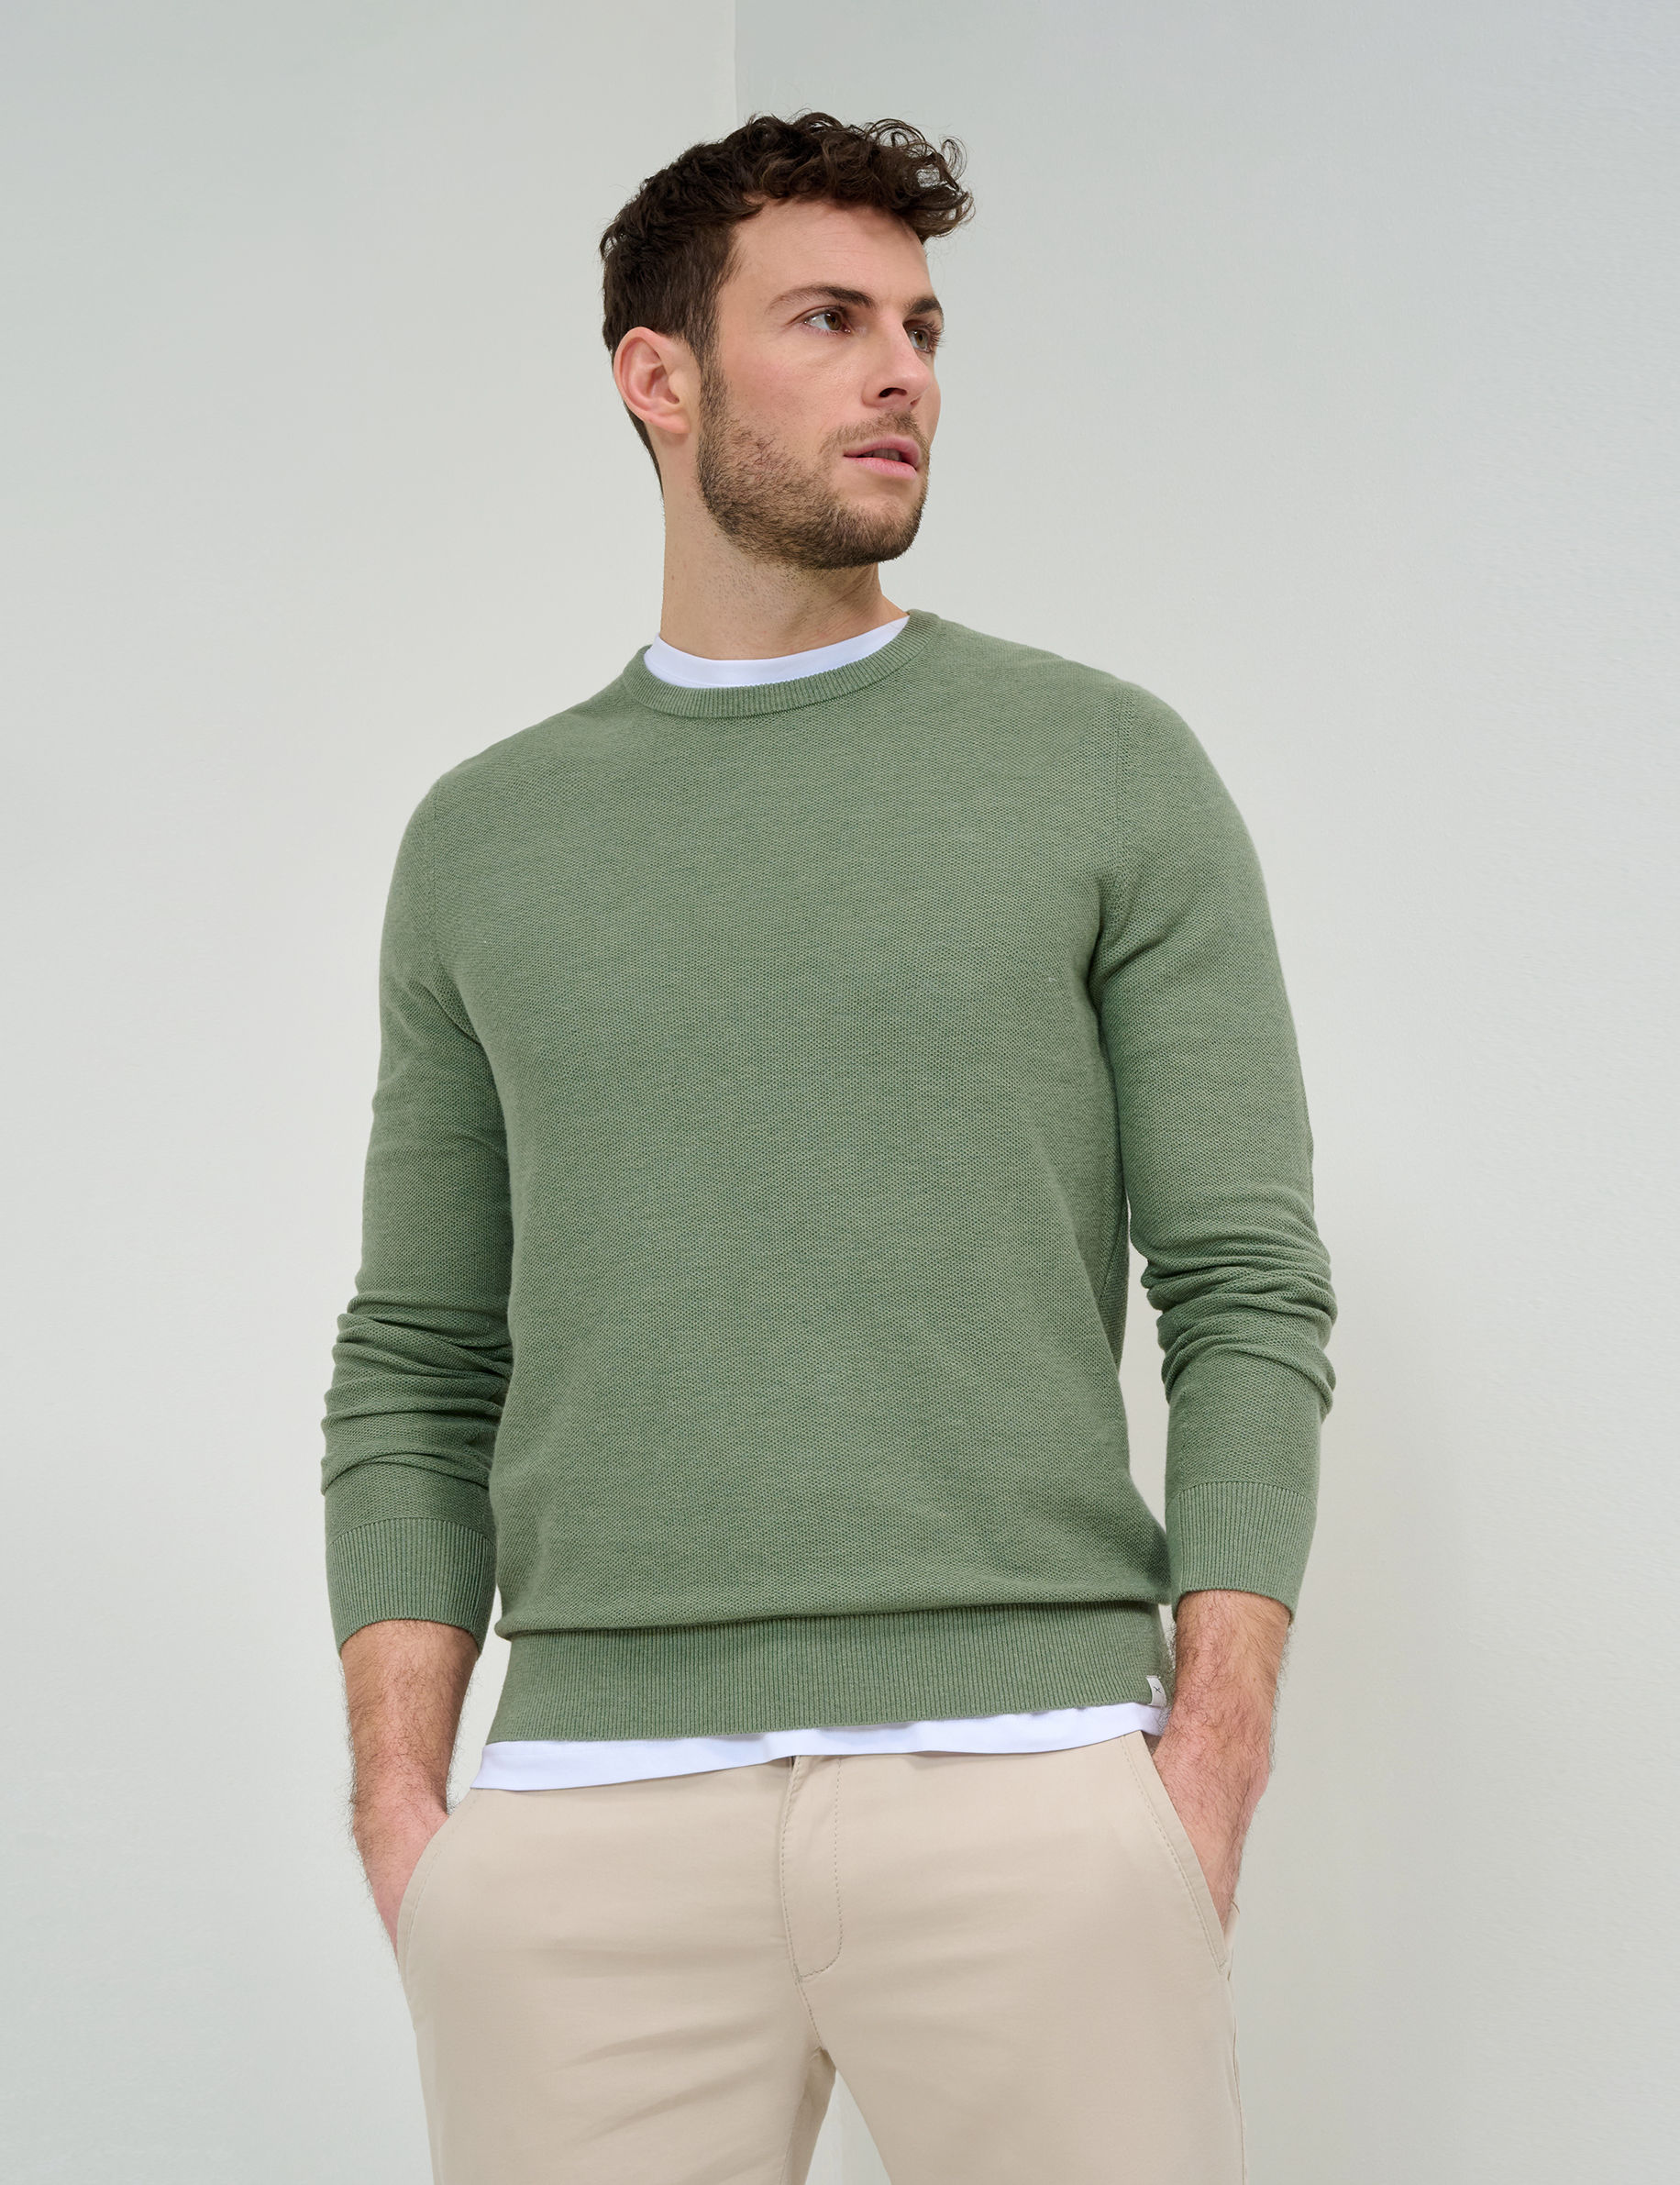 Shades of green, Men, Style RICK, MODEL_FRONT_ISHOP